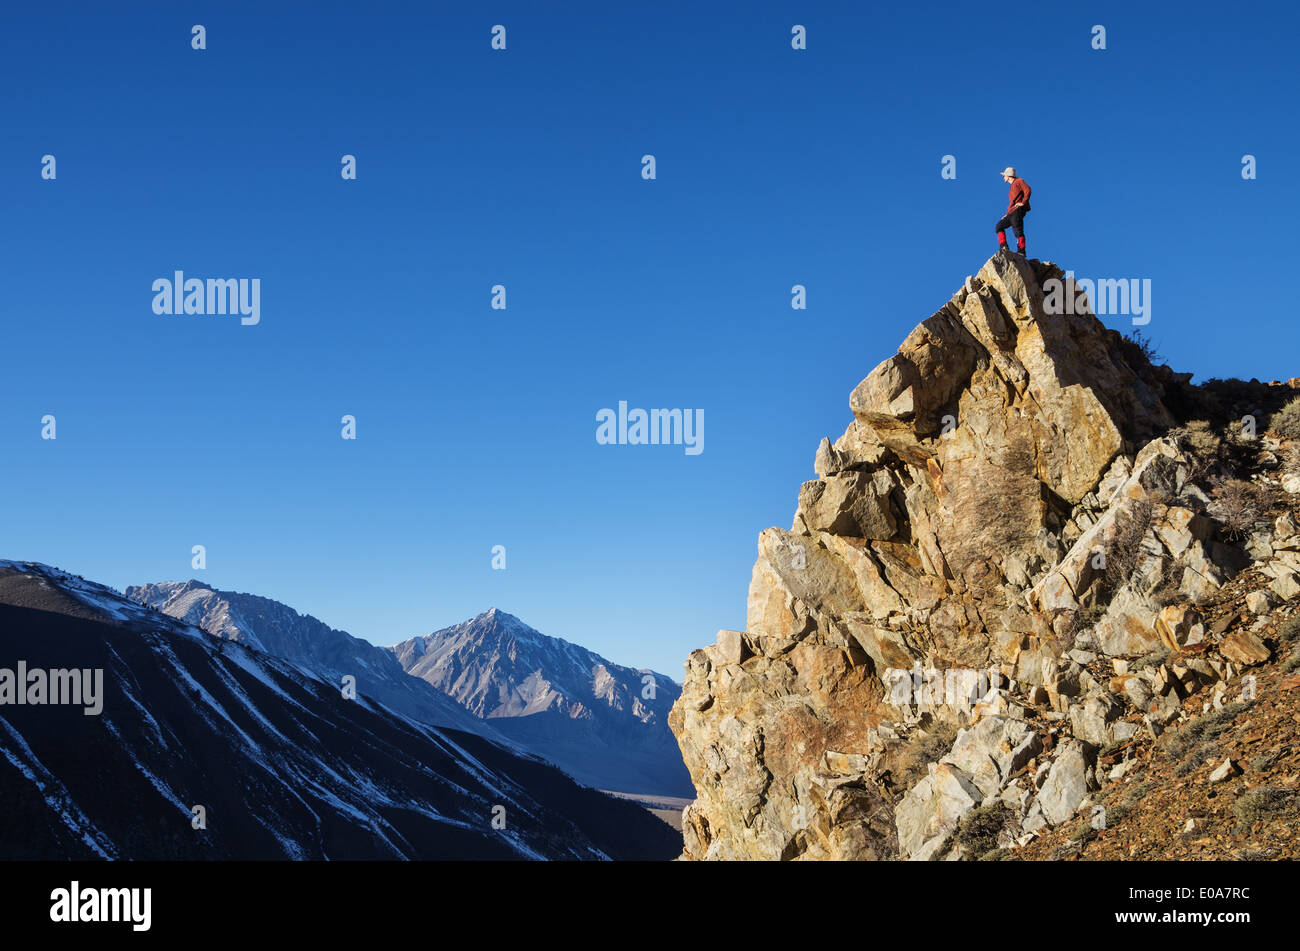 man on rocky peak looking across valley at distant mountains Stock Photo